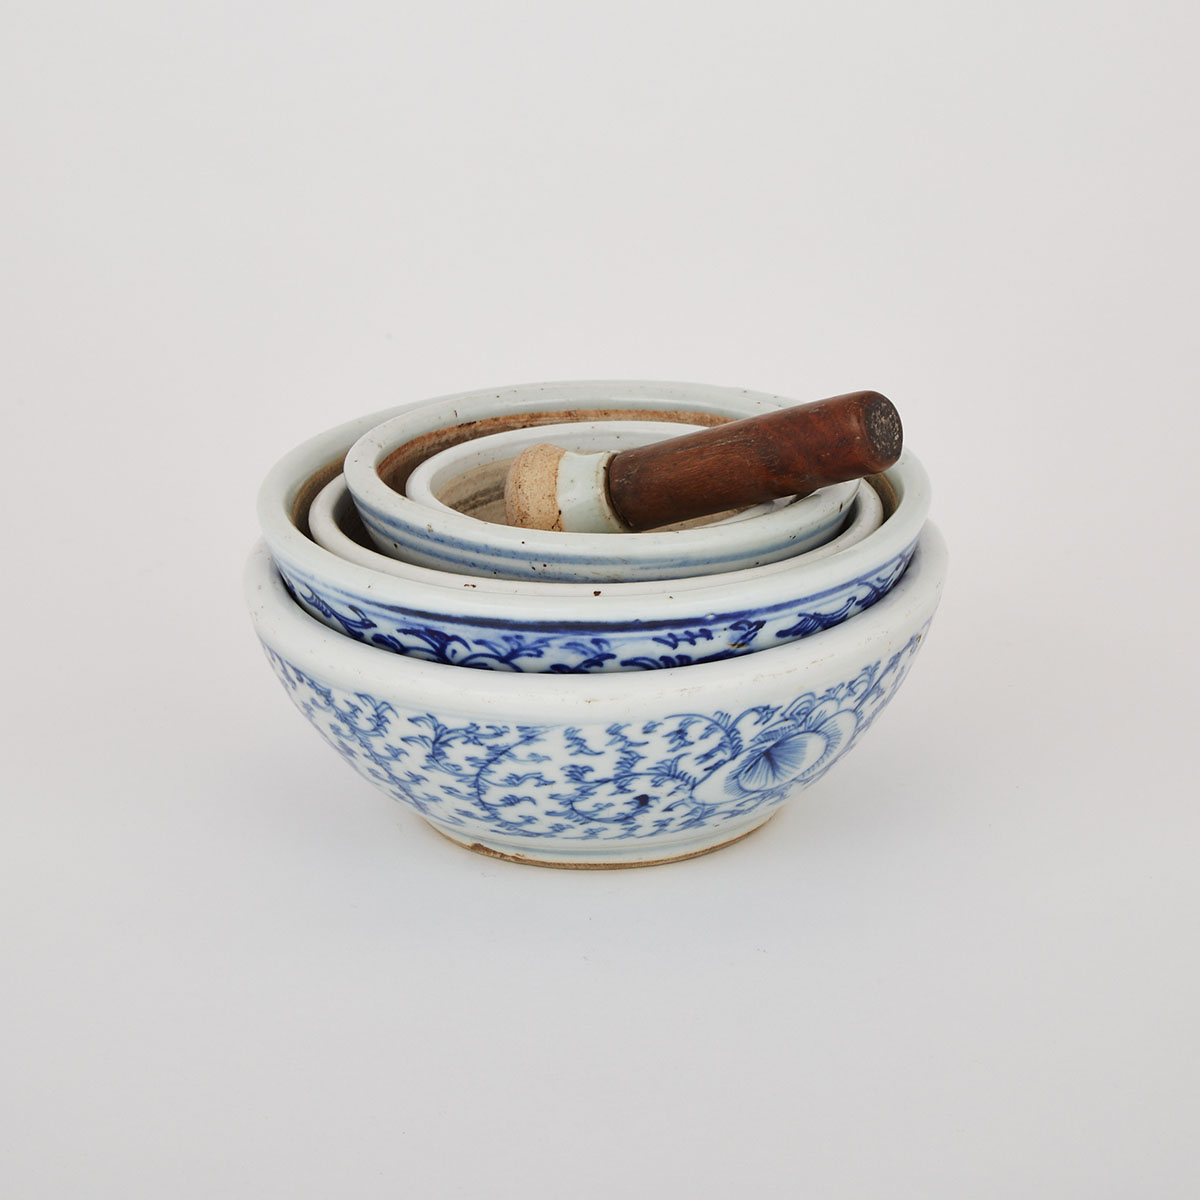 A Group of Five Blue and White Mortar Bowls, 19th Century